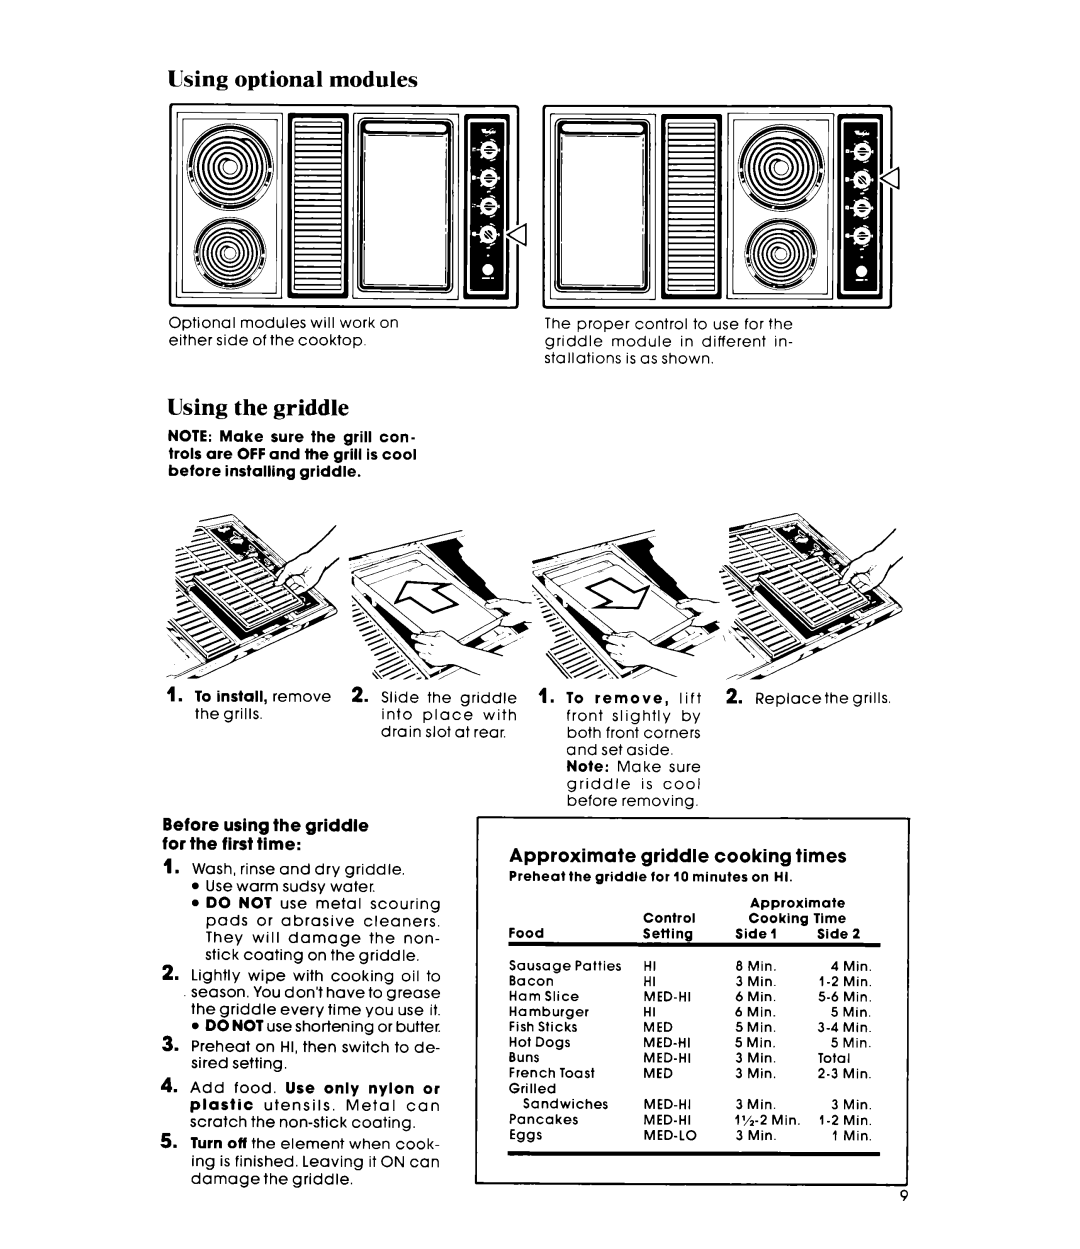 Whirlpool RC8900XMH manual Using optional modules, Using the griddle, 1. To, Before using the griddle for the first time 